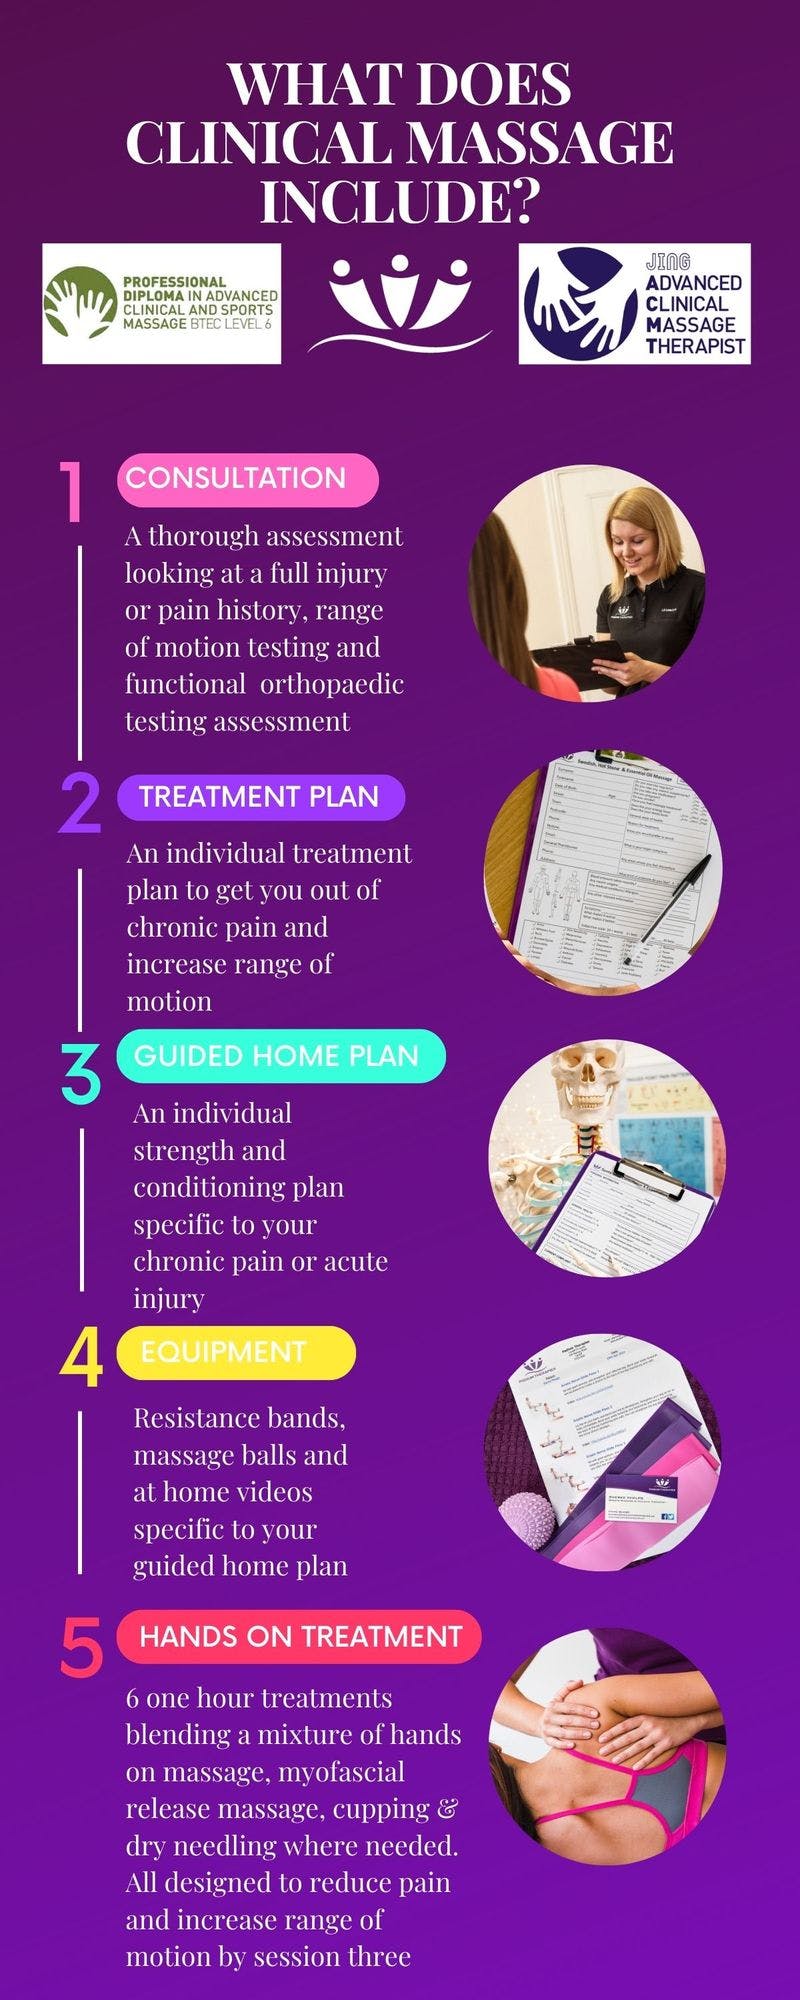 What does clinical massage include?